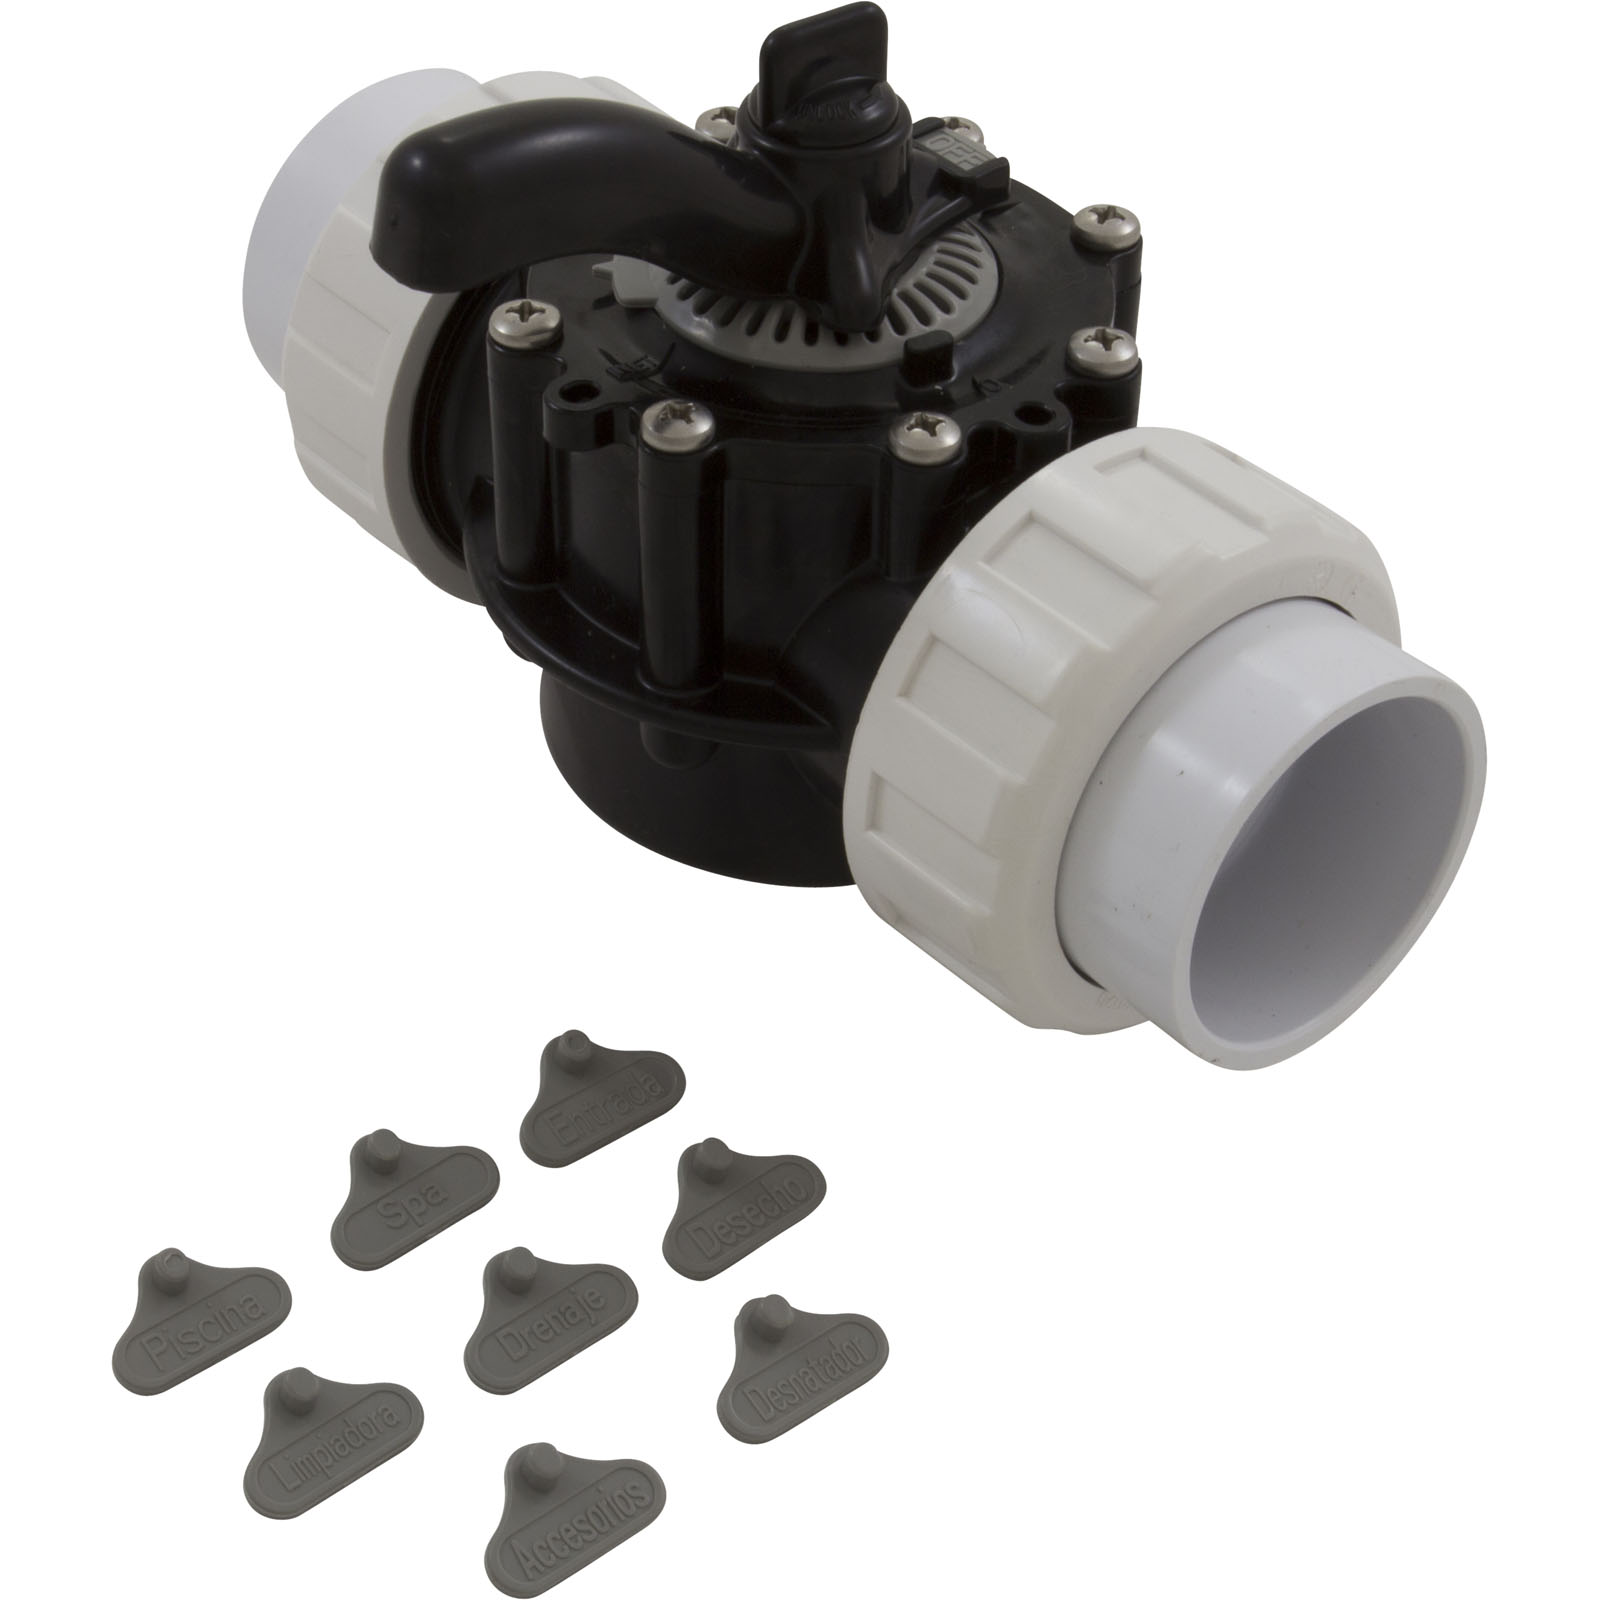 Picture of Diverter Valve, 2In Unions, 2-Way, Black